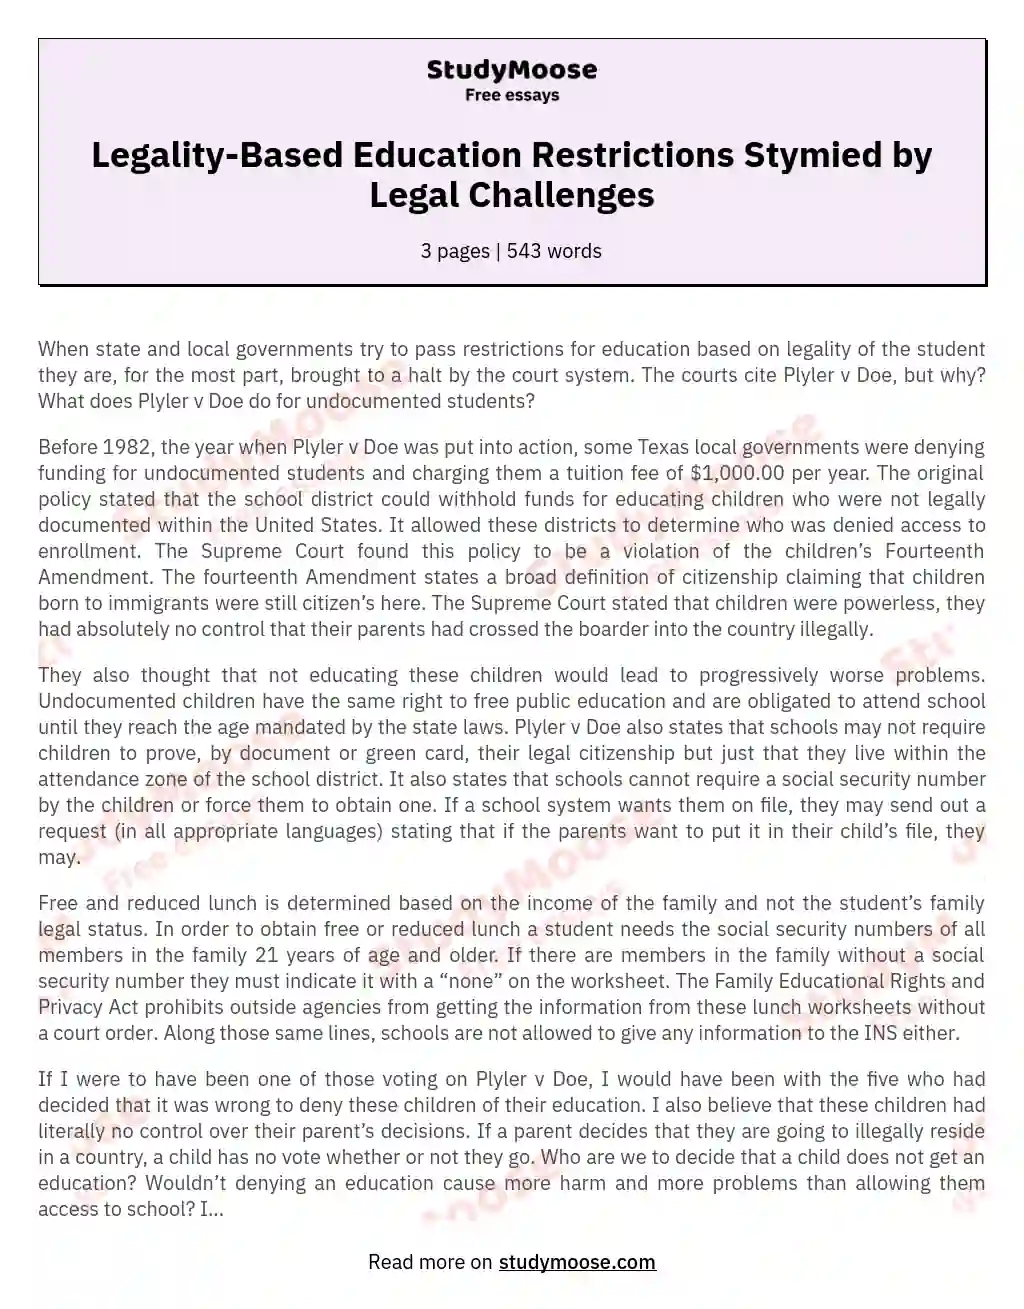 Legality-Based Education Restrictions Stymied by Legal Challenges essay